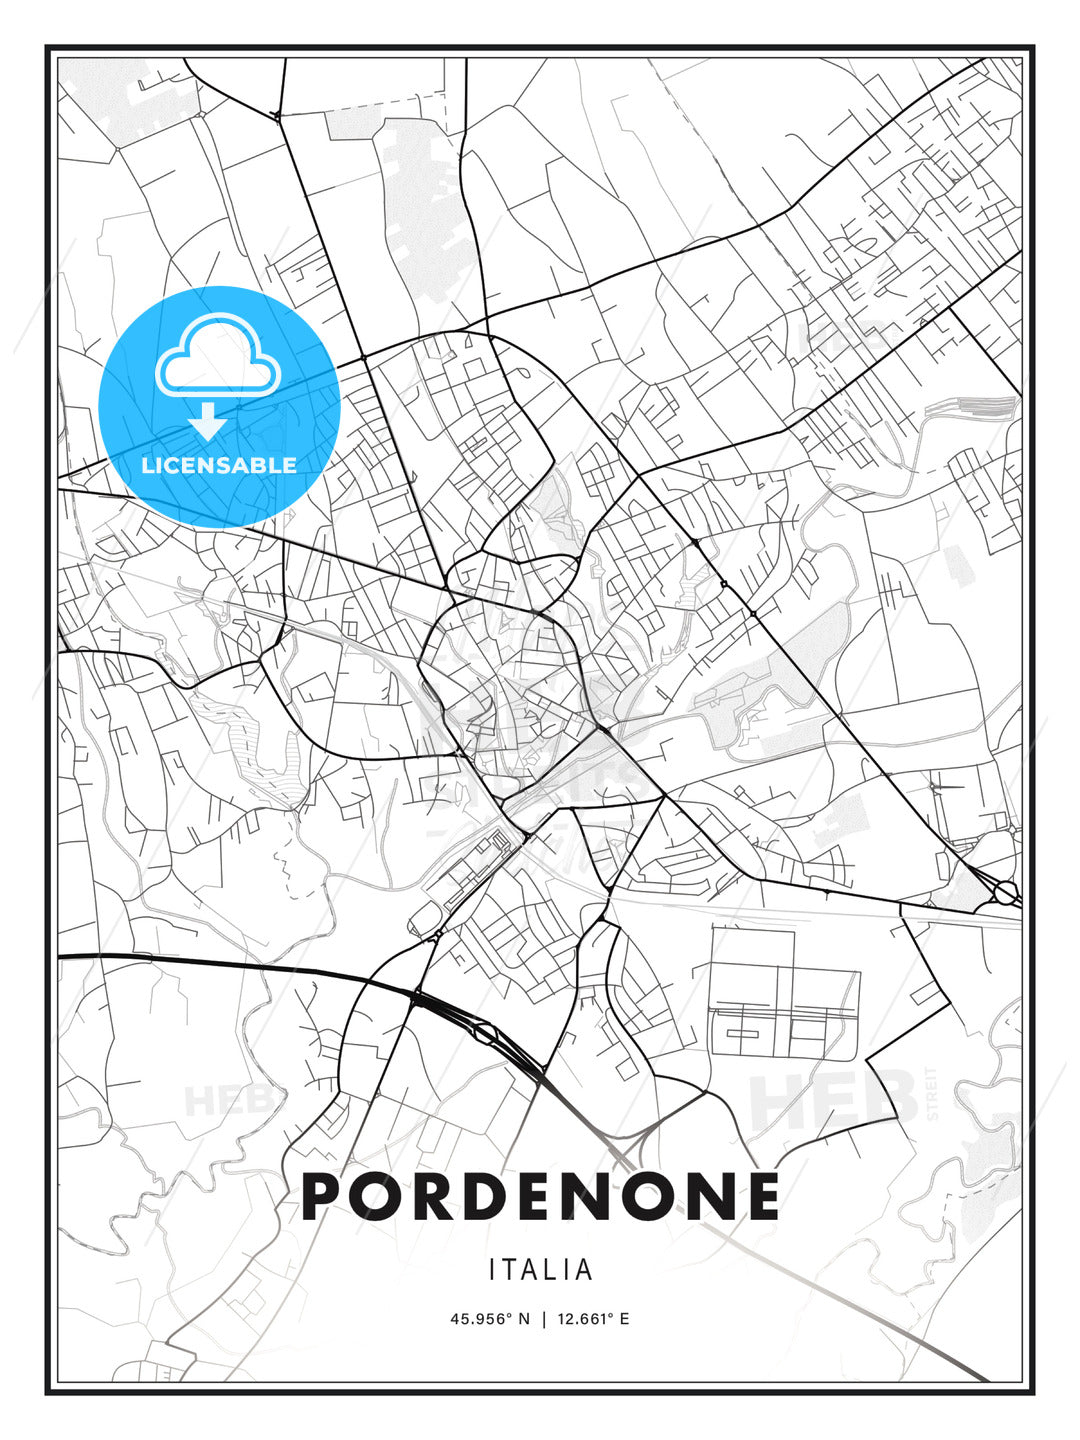 Pordenone, Italy, Modern Print Template in Various Formats - HEBSTREITS Sketches